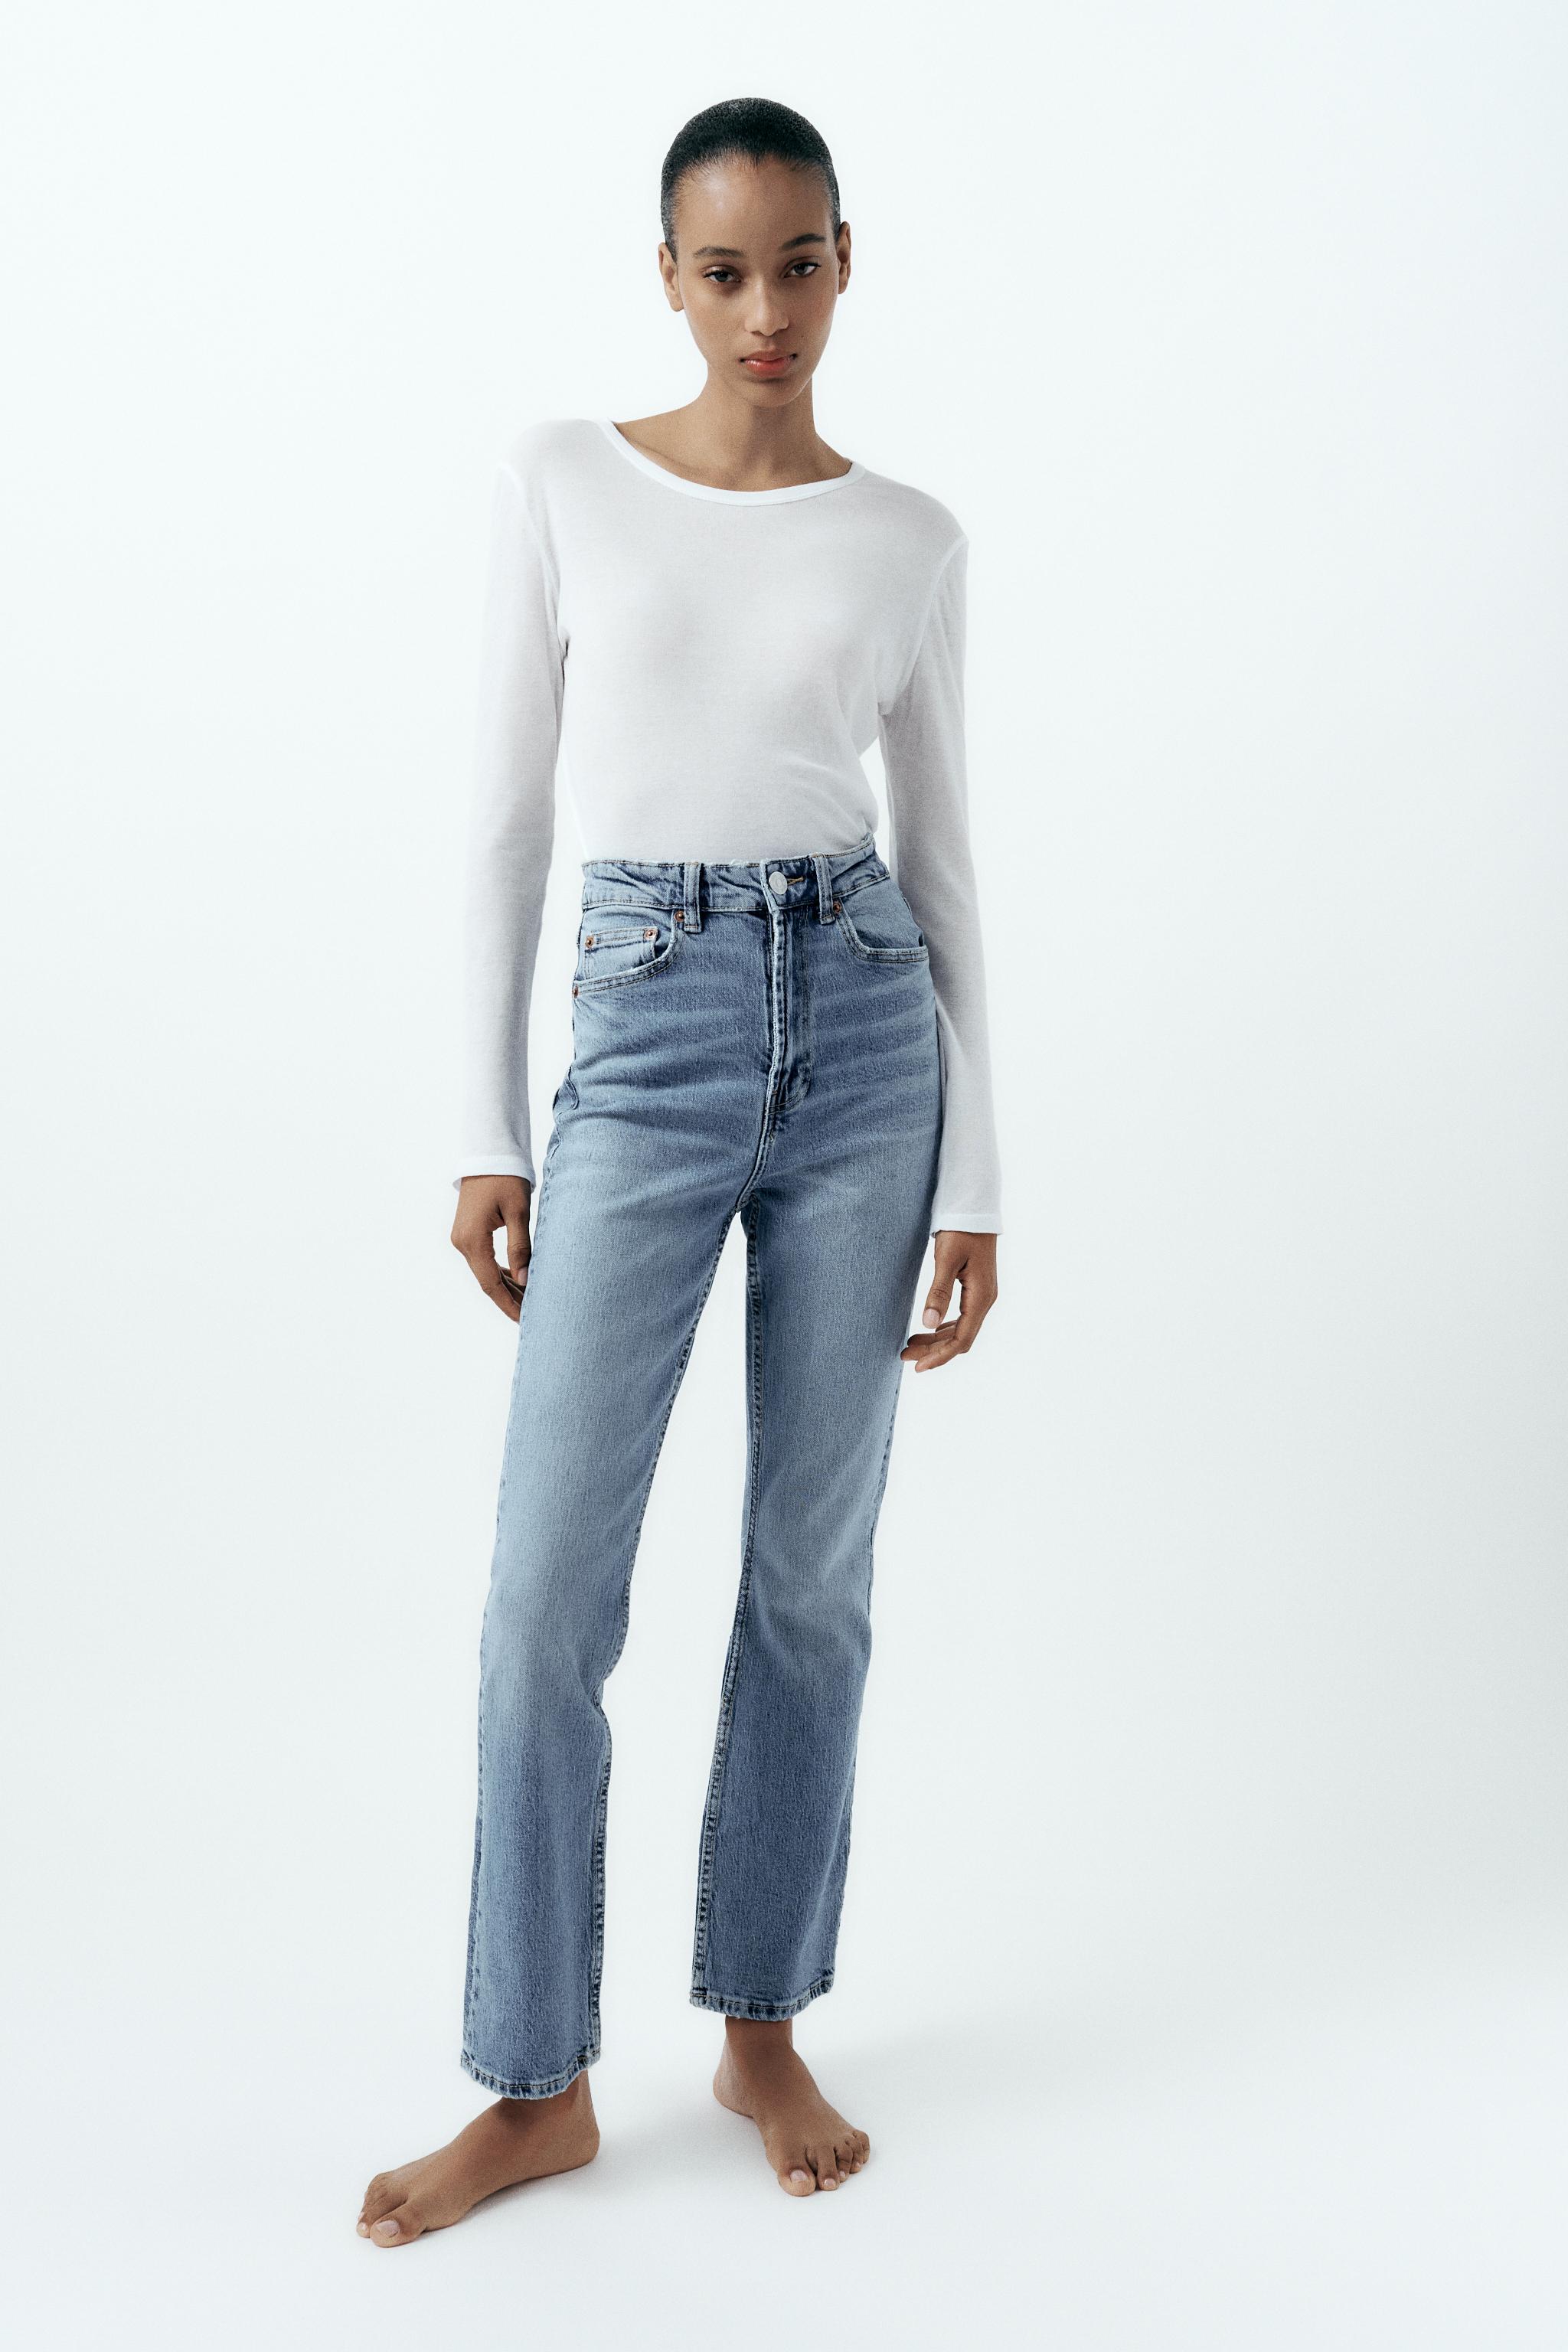 TRF STOVE PIPE JEANS WITH A HIGH WAIST - Blue | ZARA United States